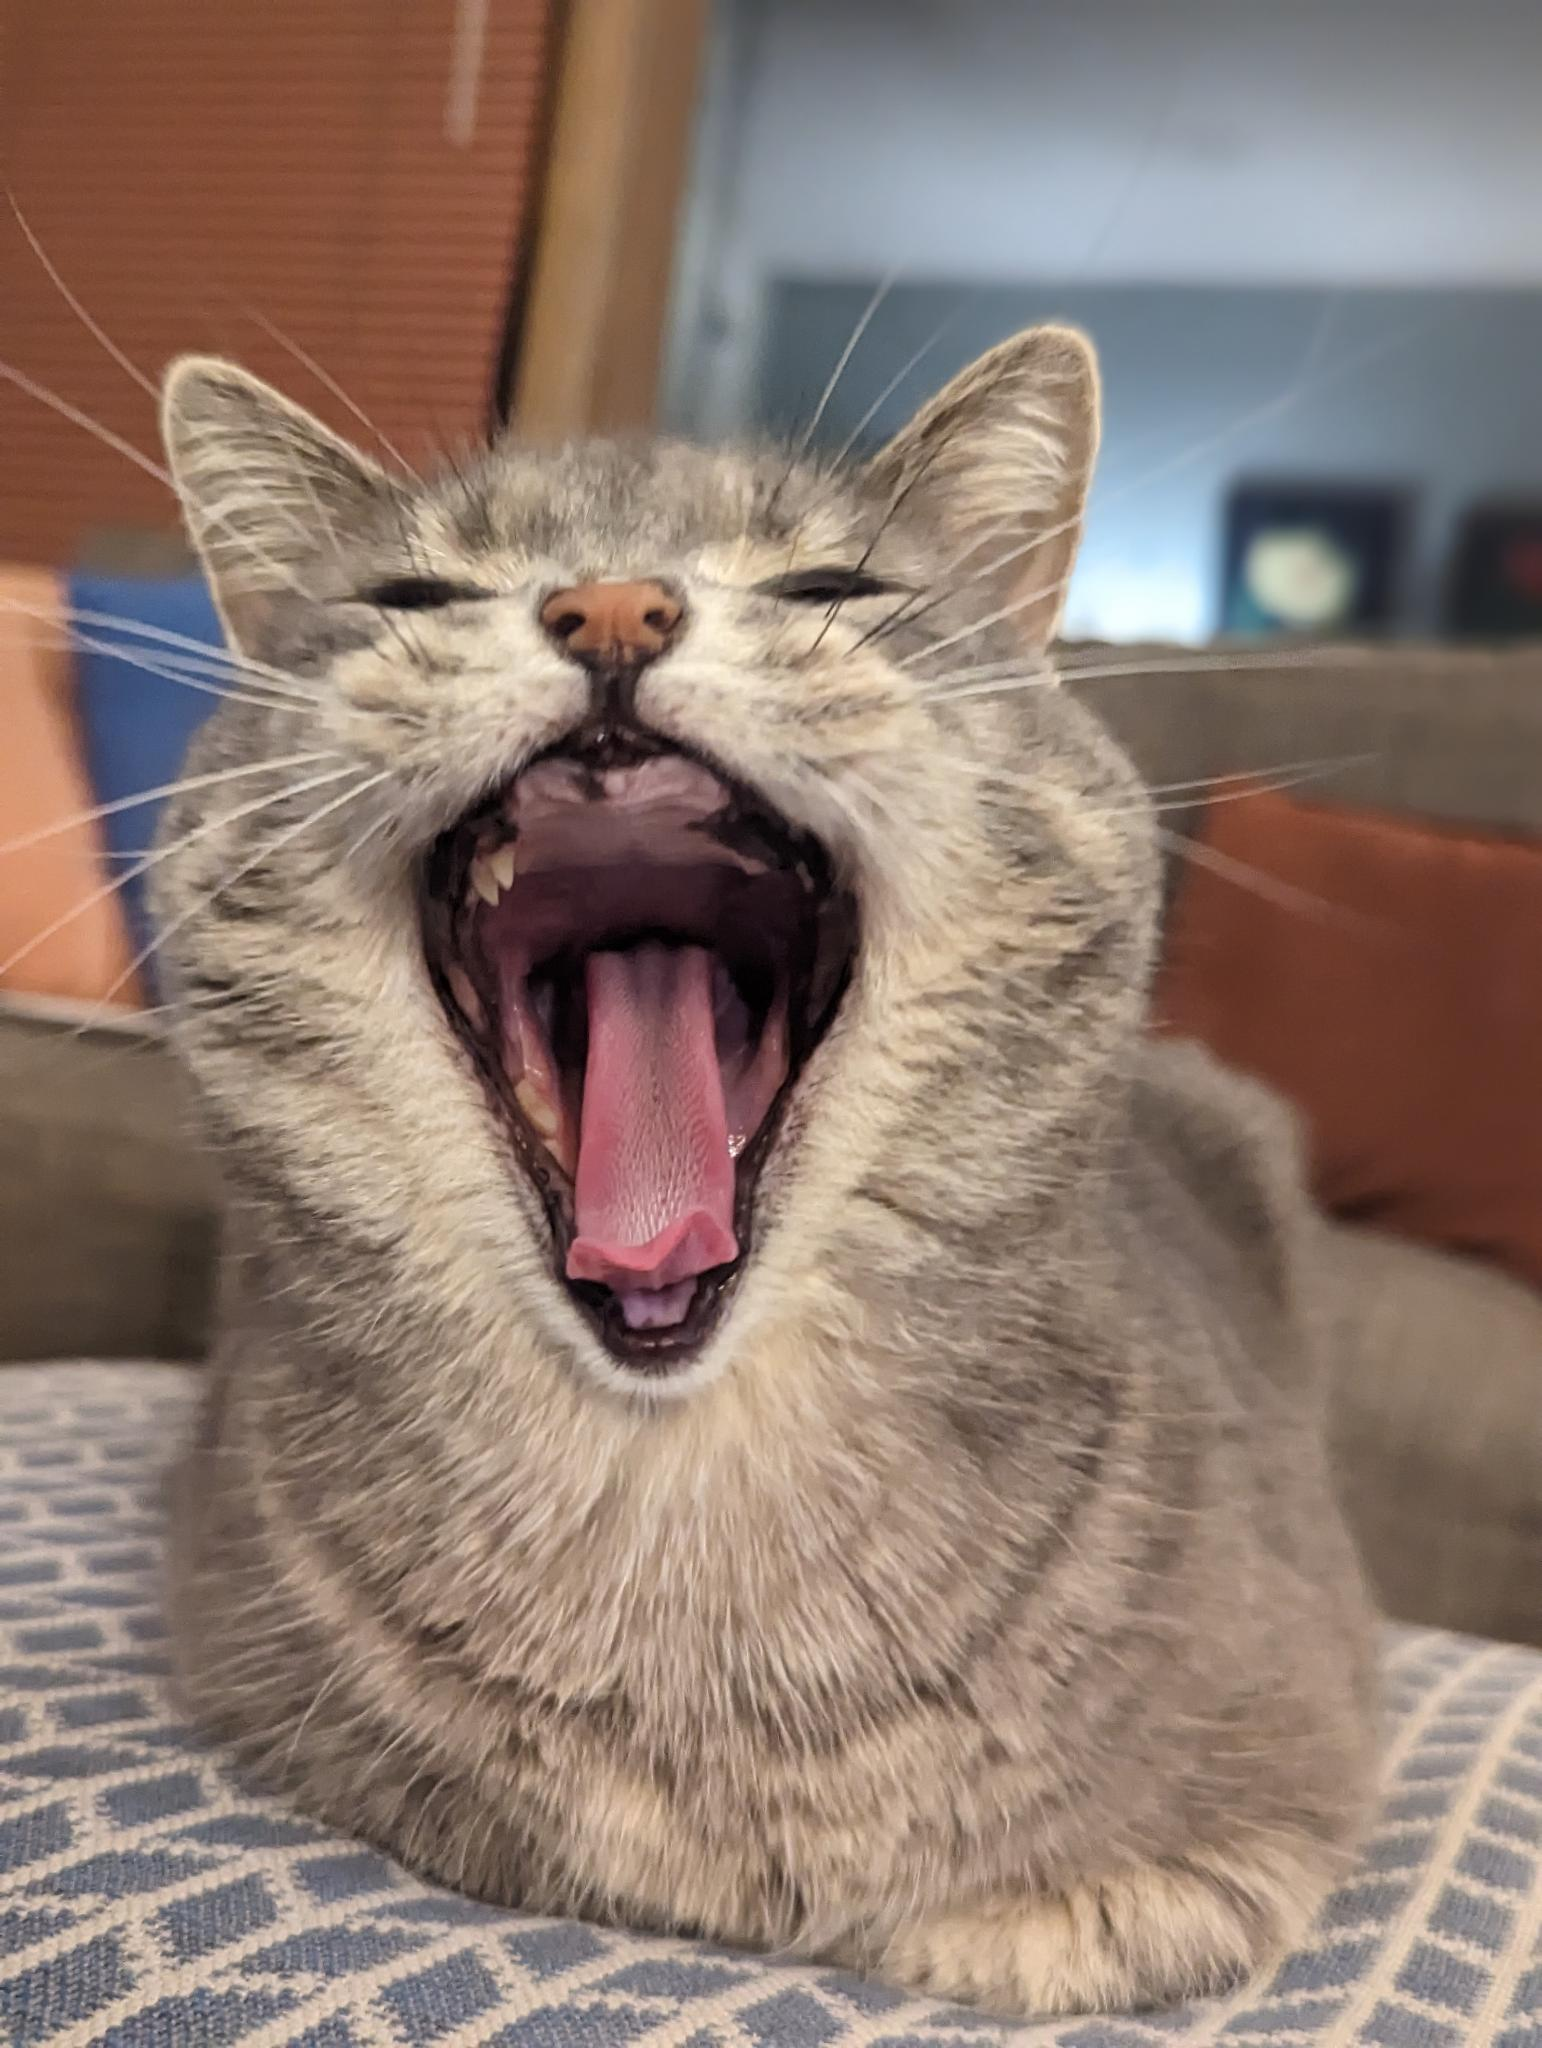 A picture of a gray cat named Masha who has only a few teeth yawning.